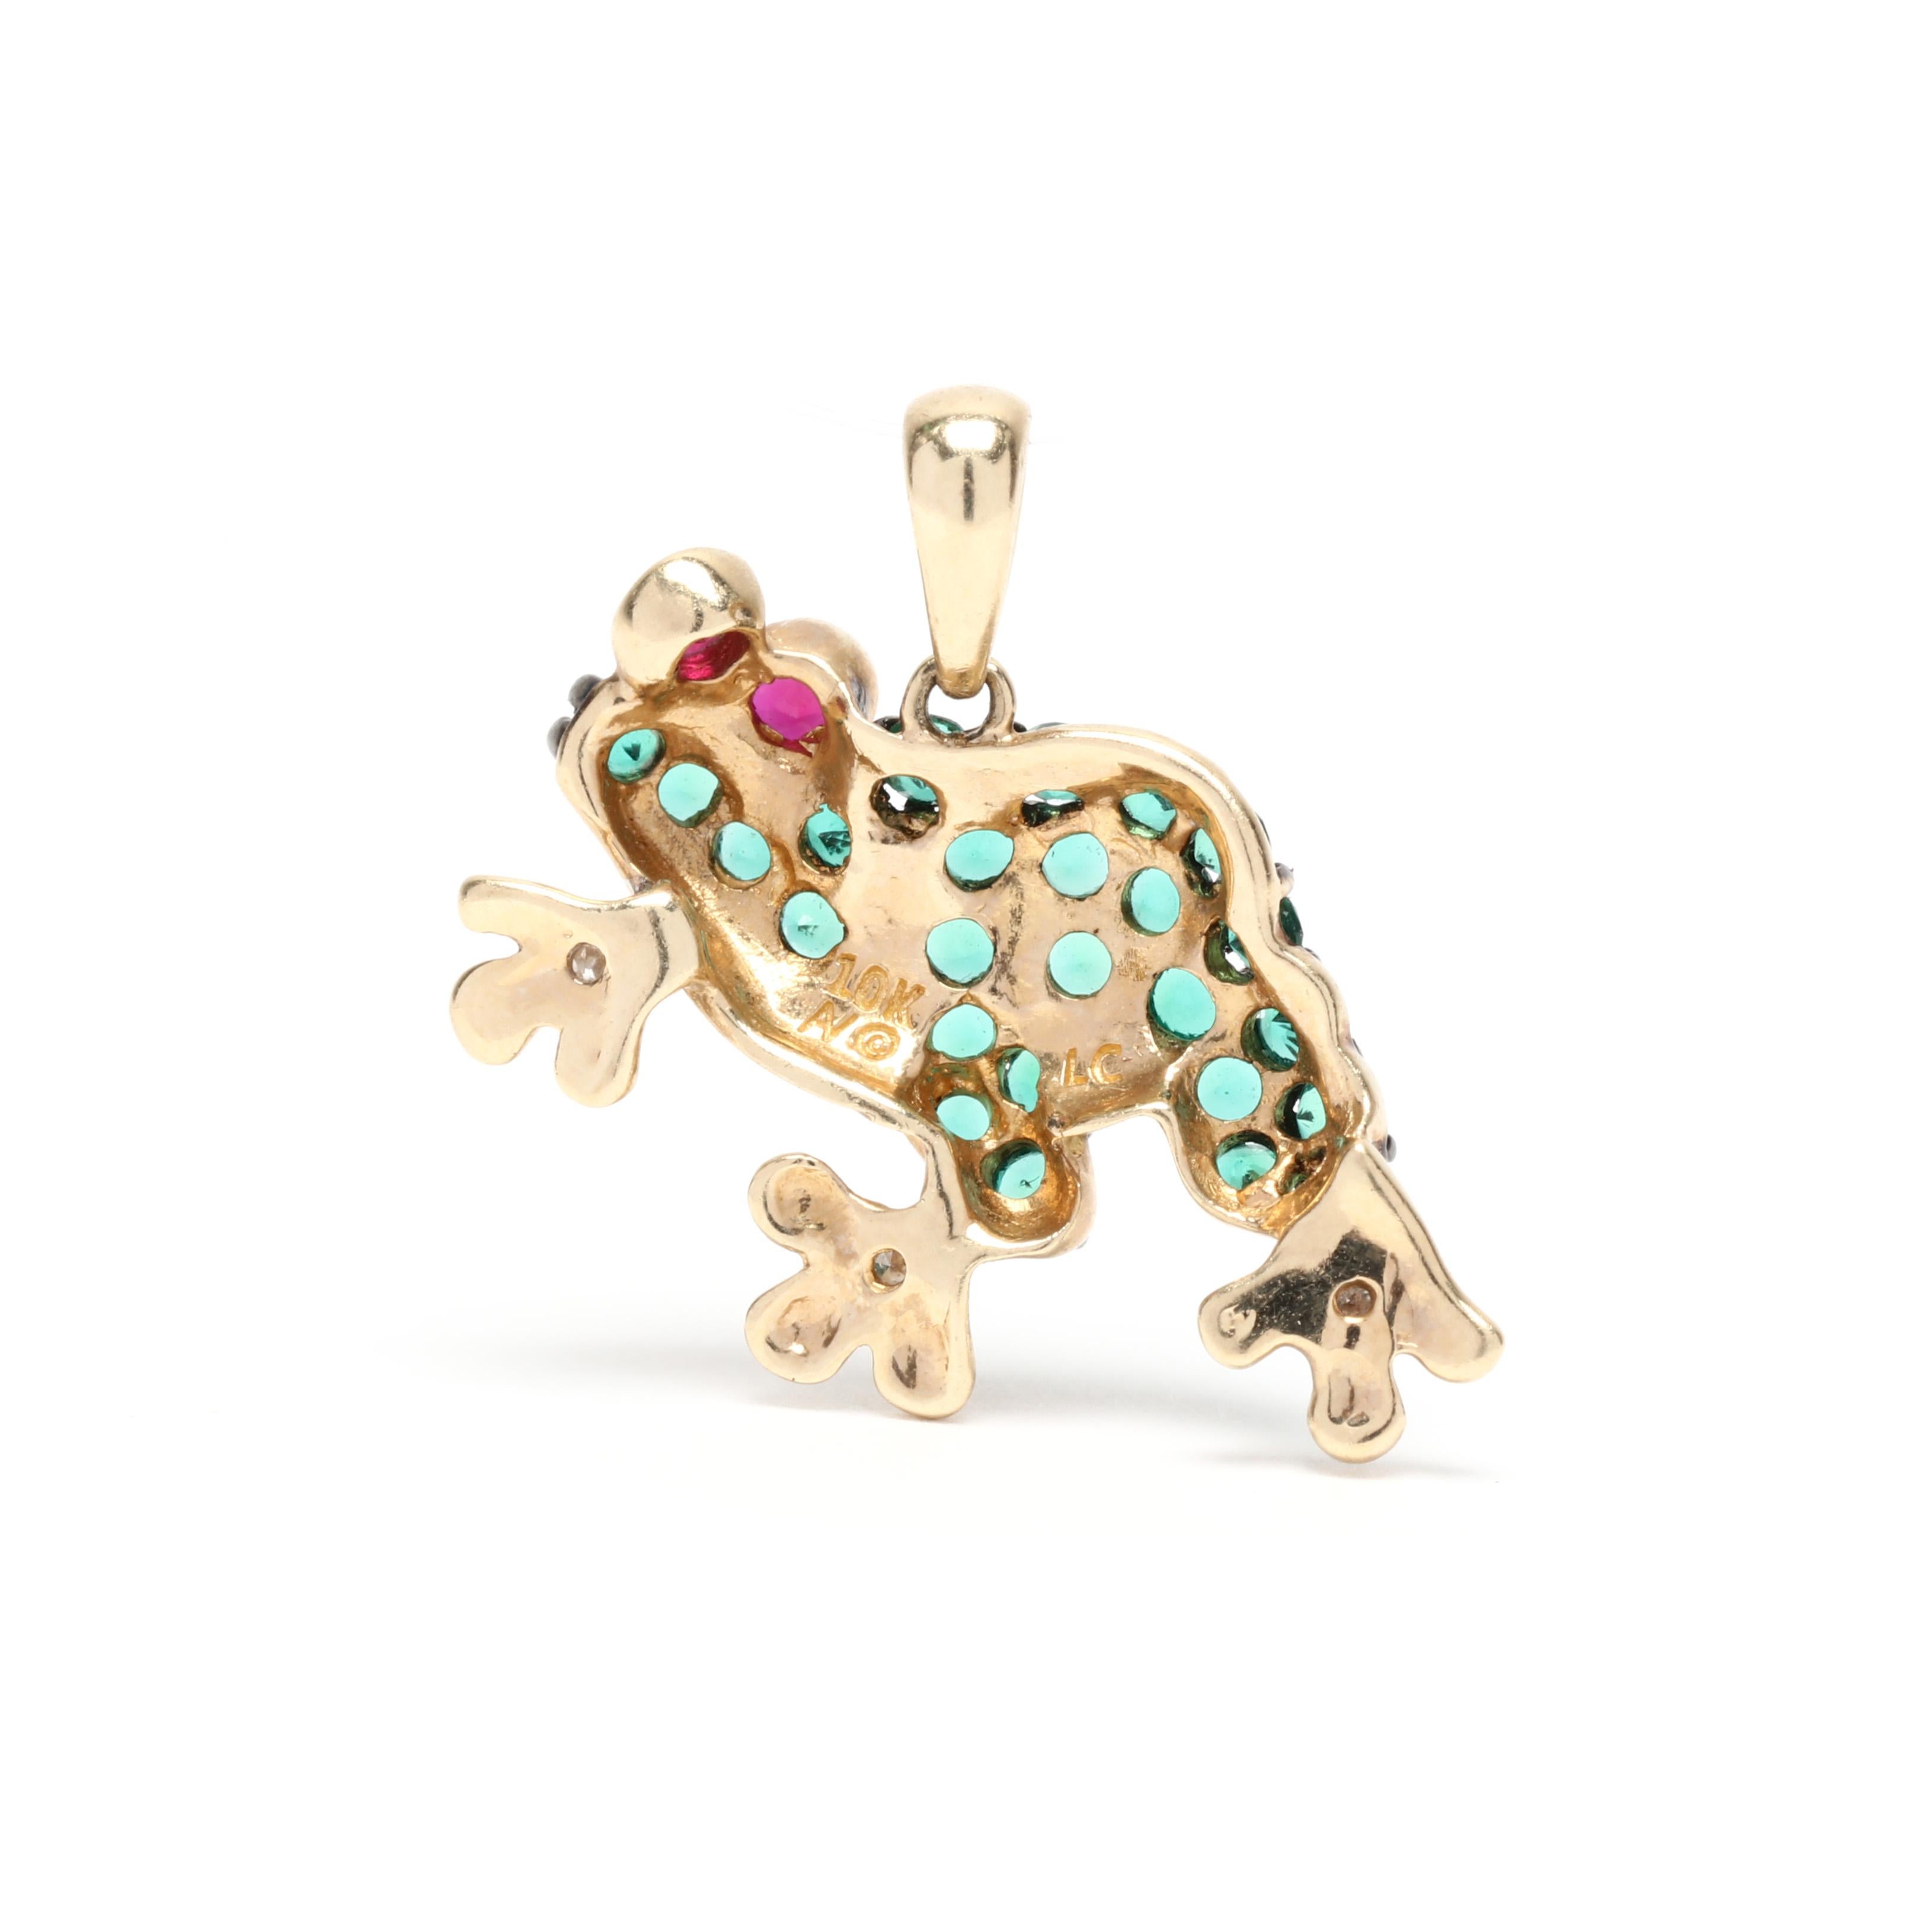 A vintage 10 karat yellow gold and gem-set frog charm. This charm features a small frog motif set with round cut green cubic zirconias on the body, bezel set red cubic zirconias for eyes and diamond melee accents on its feet.

Length: 11/16